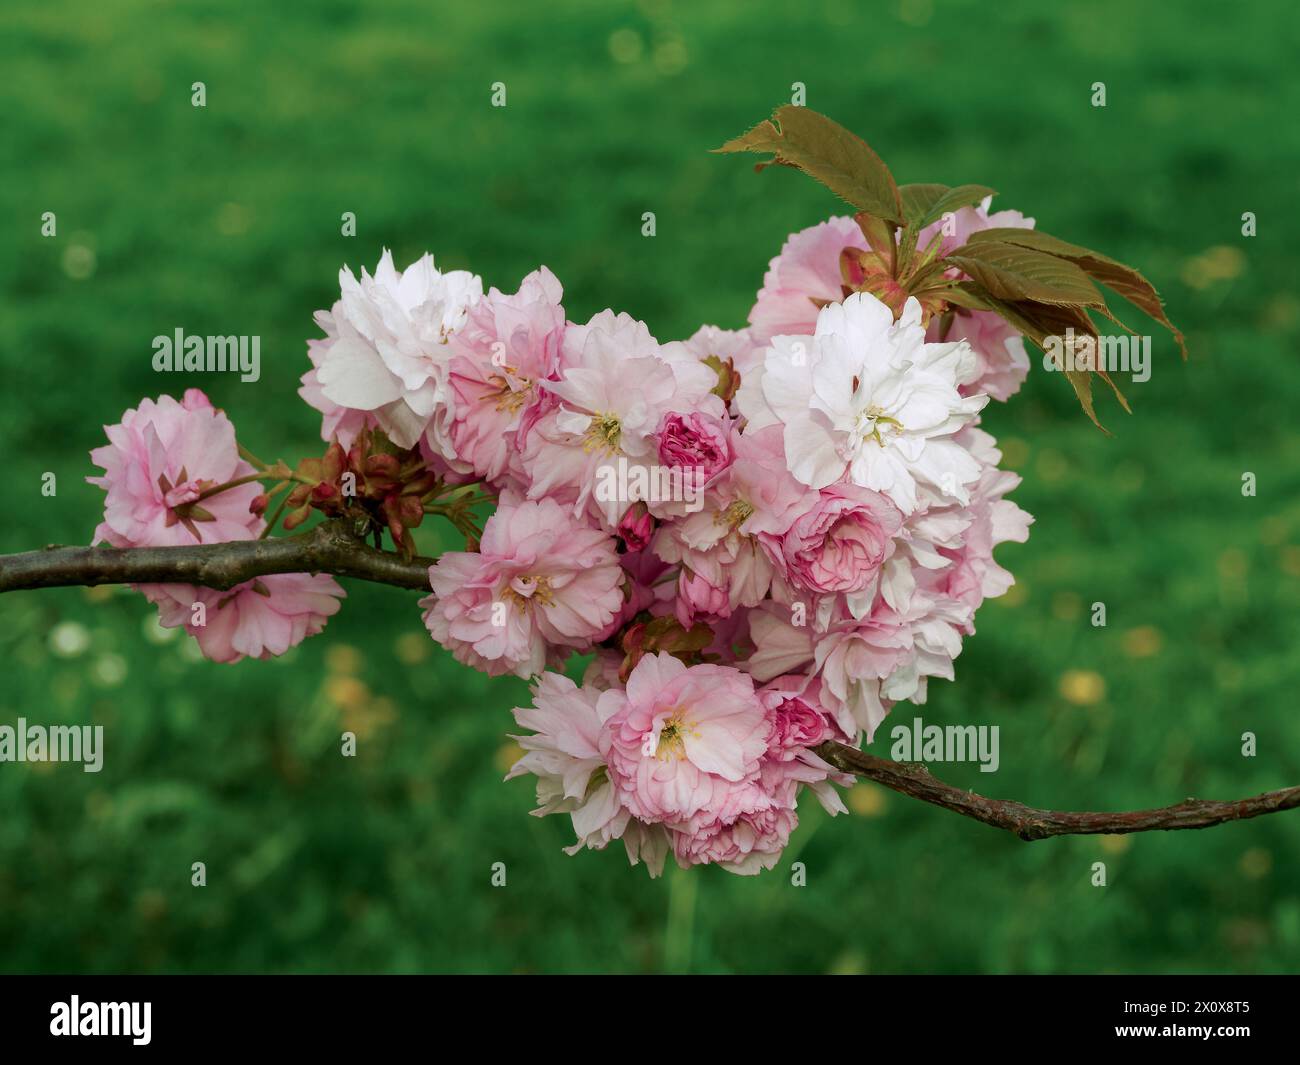 bouquet of JAPANESE CHERRY flowers on a branch in a natural environment, white and pink flowers close up Stock Photo